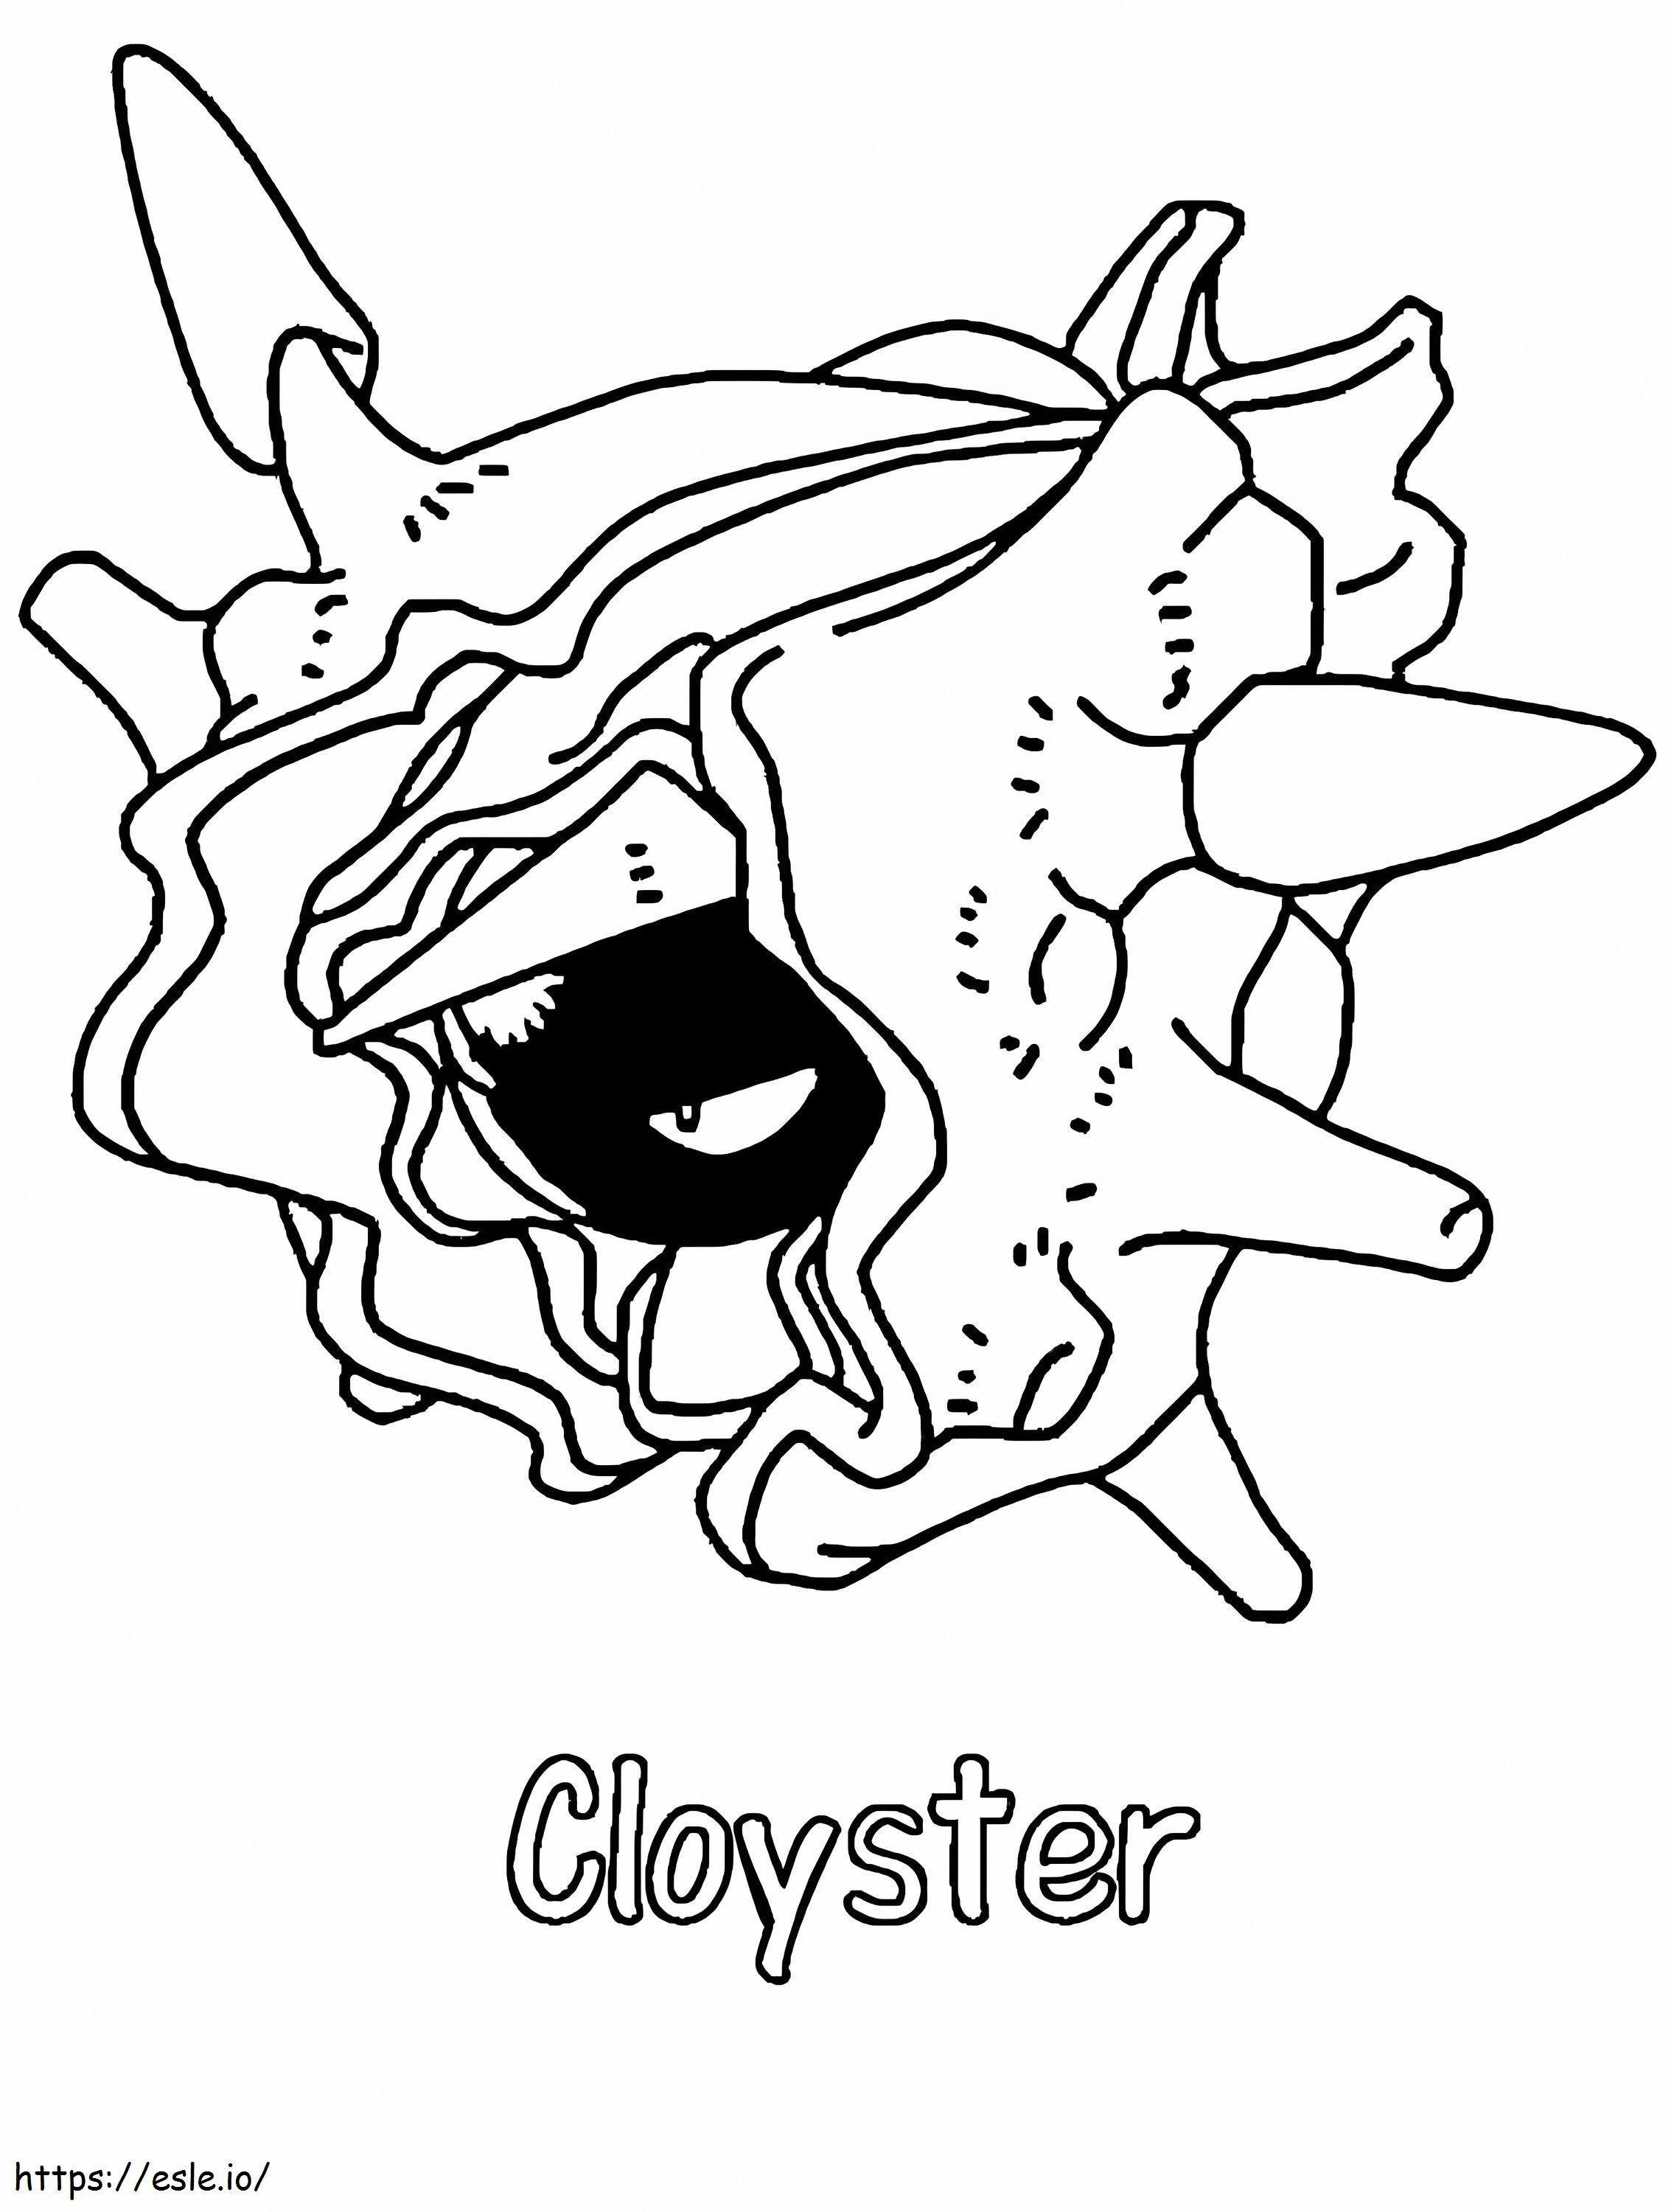 Cloyster Pokemon coloring page